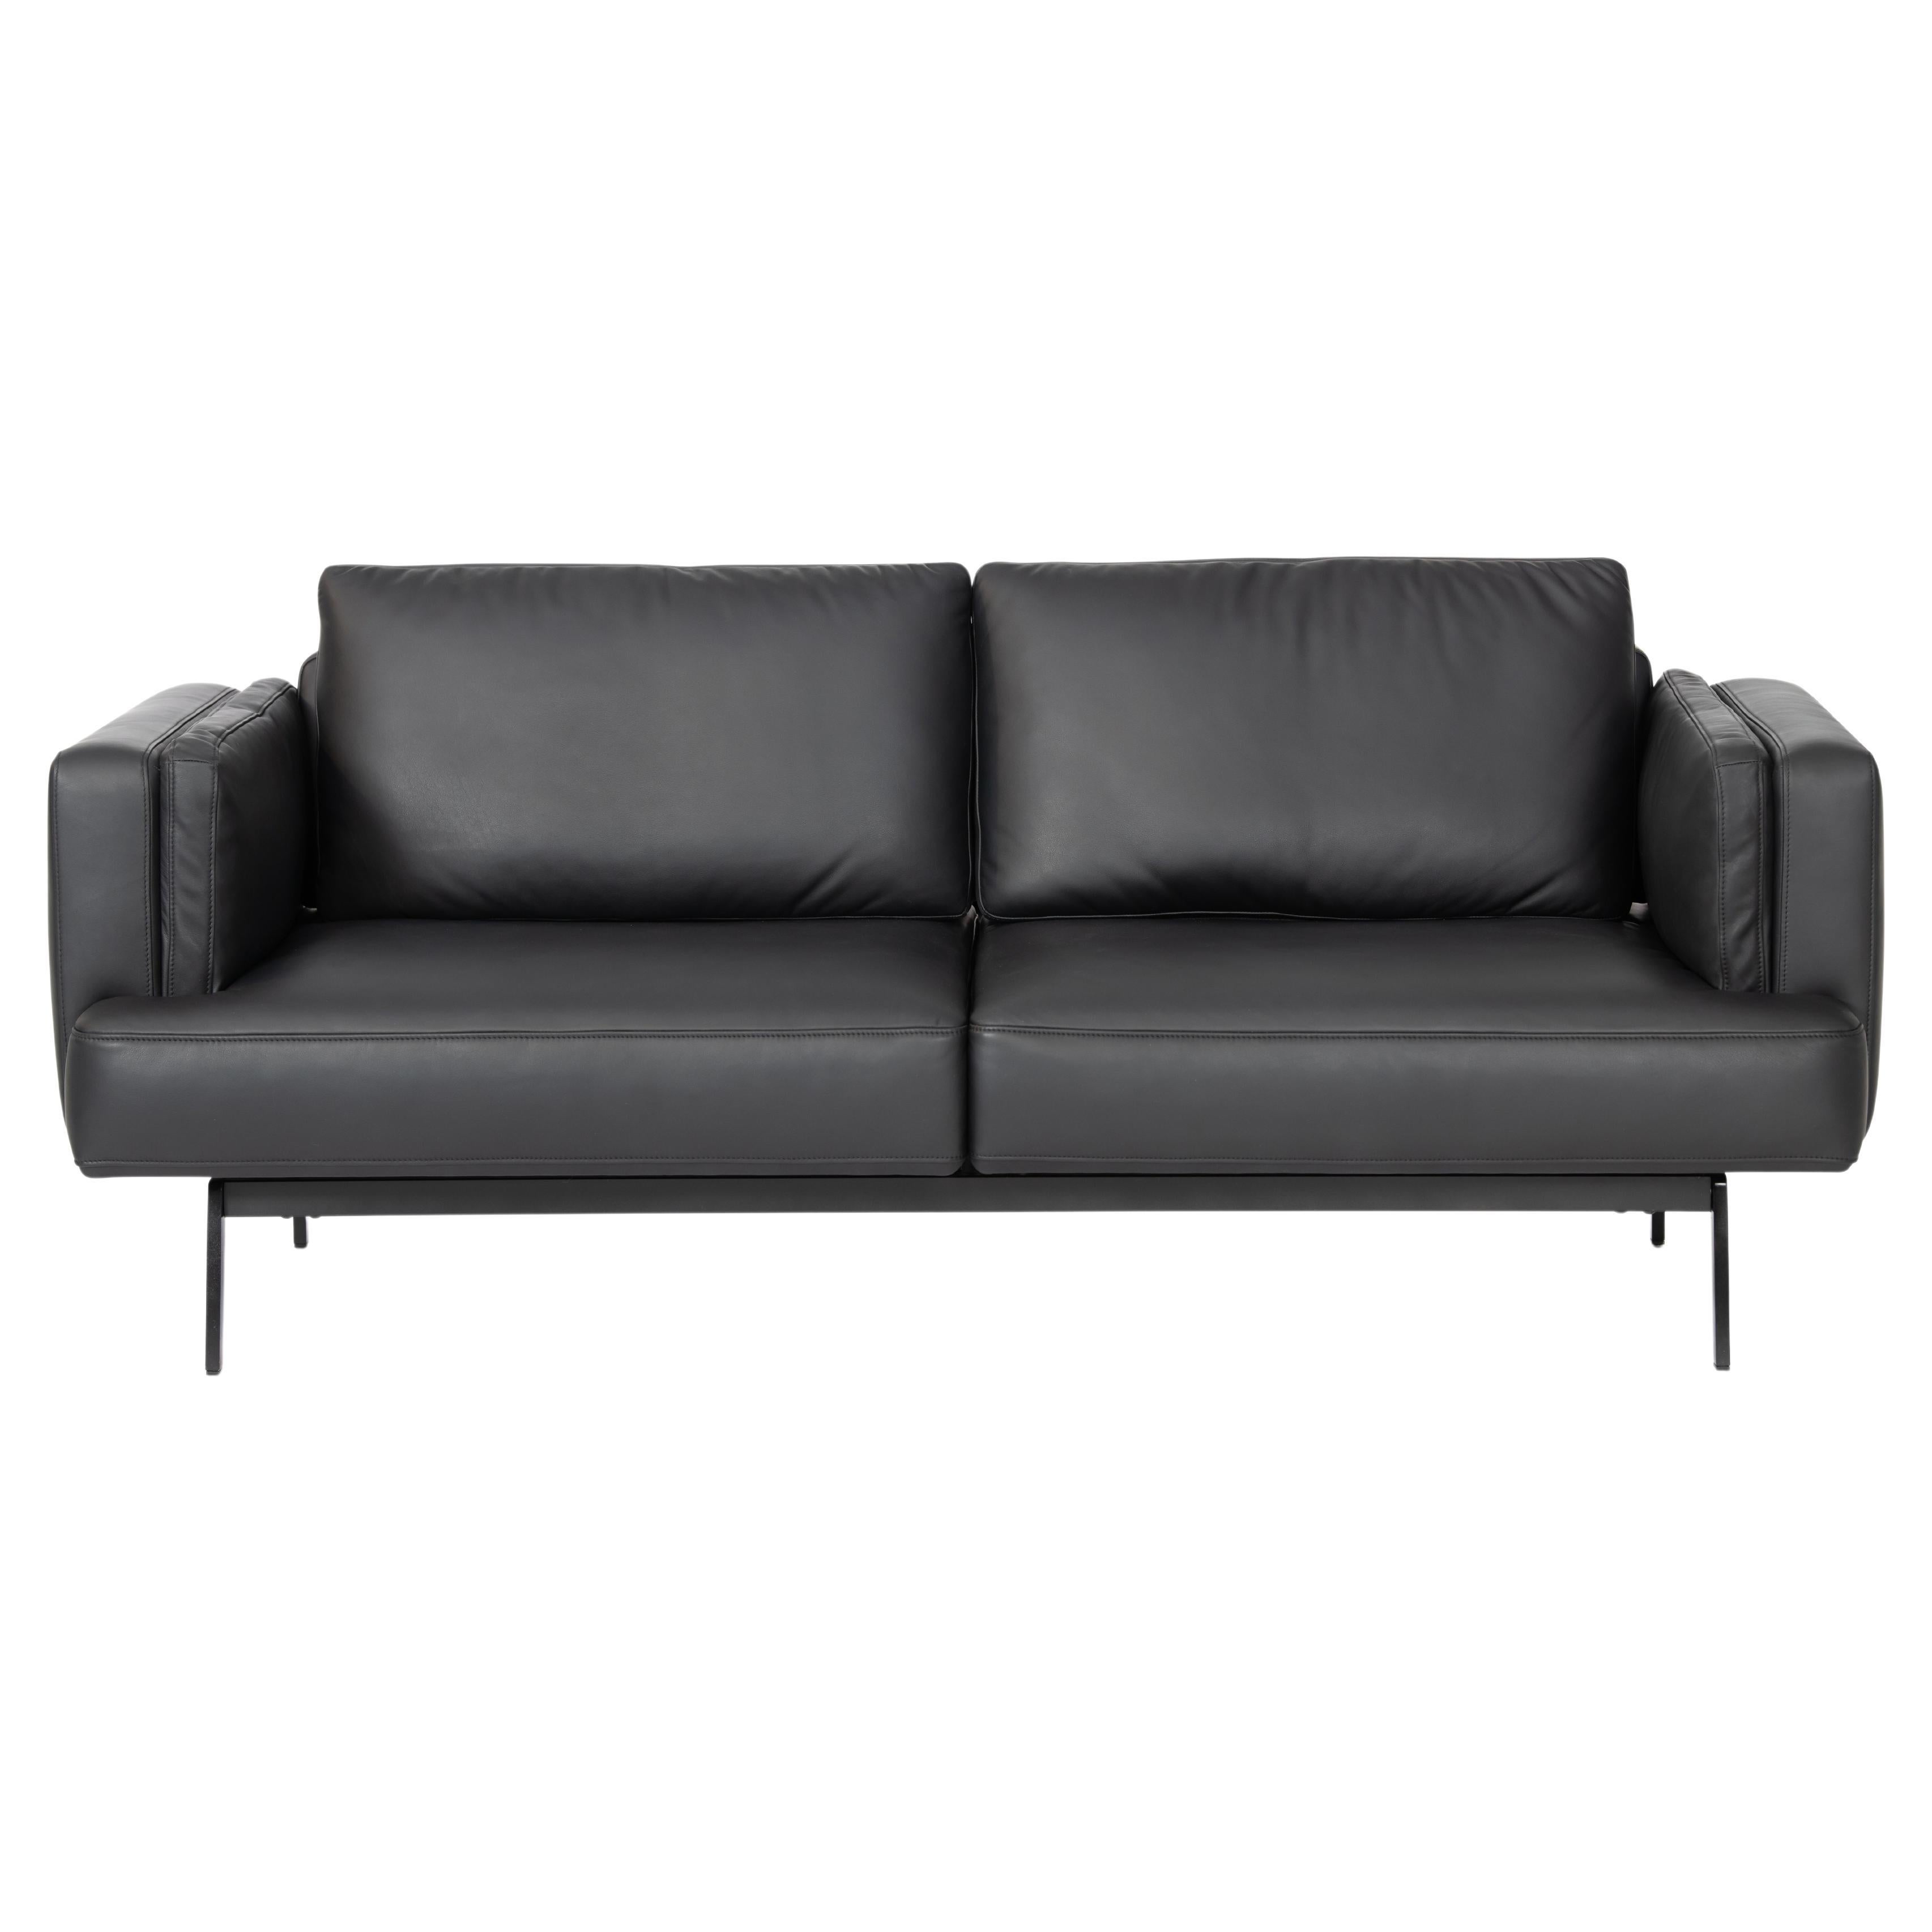 De Sede DS-747/03 Multifunctional Sofa in Black Leather Seat and Back Upholstery For Sale